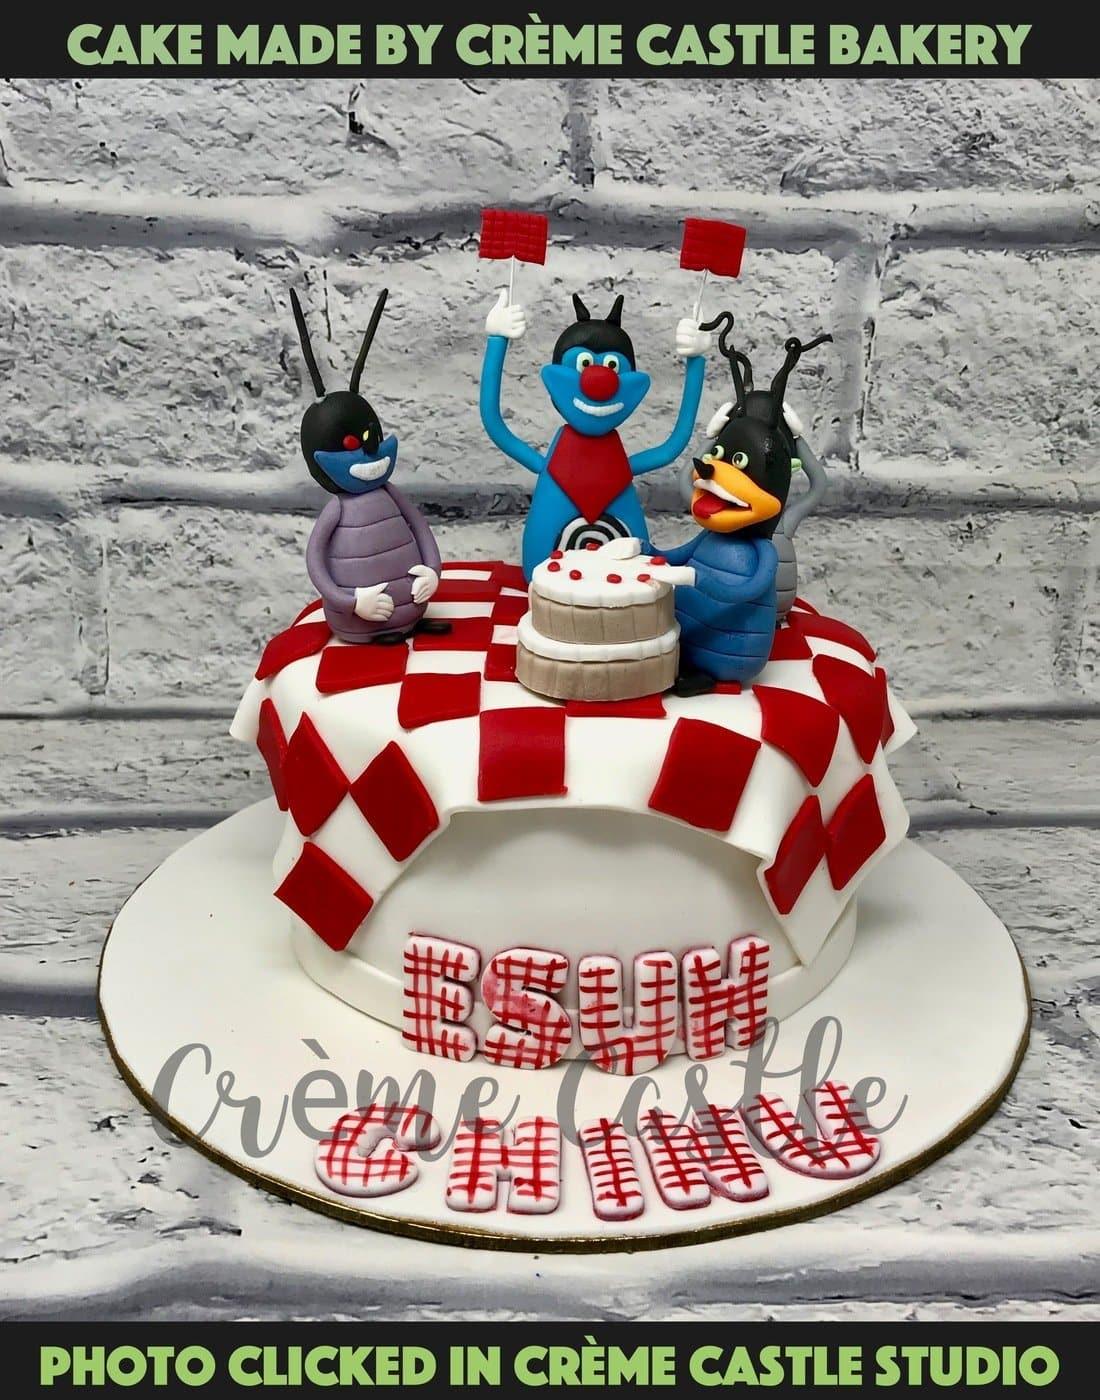 2D OGGY AND THE COCKROACHES CAKE | Kaff Cakes